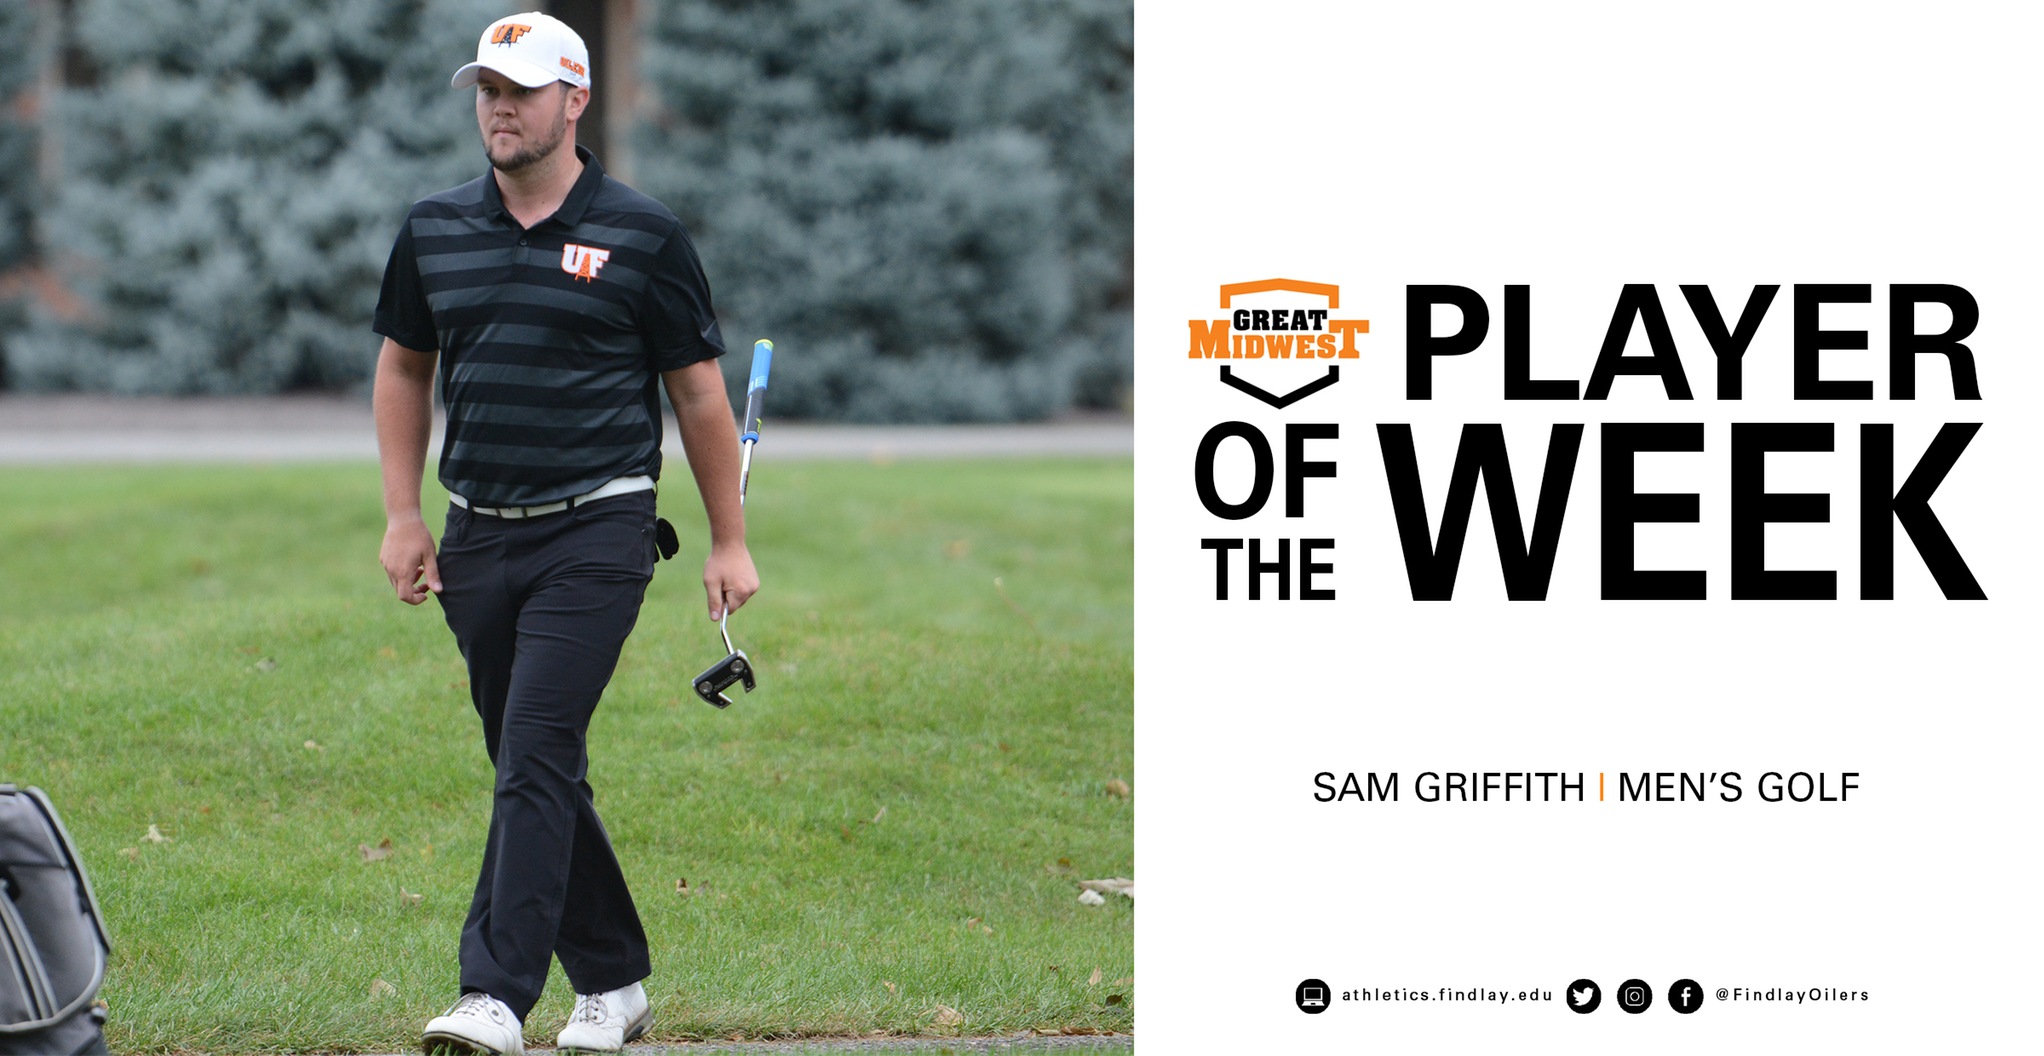 Griffith Earns Player of the Week Honors